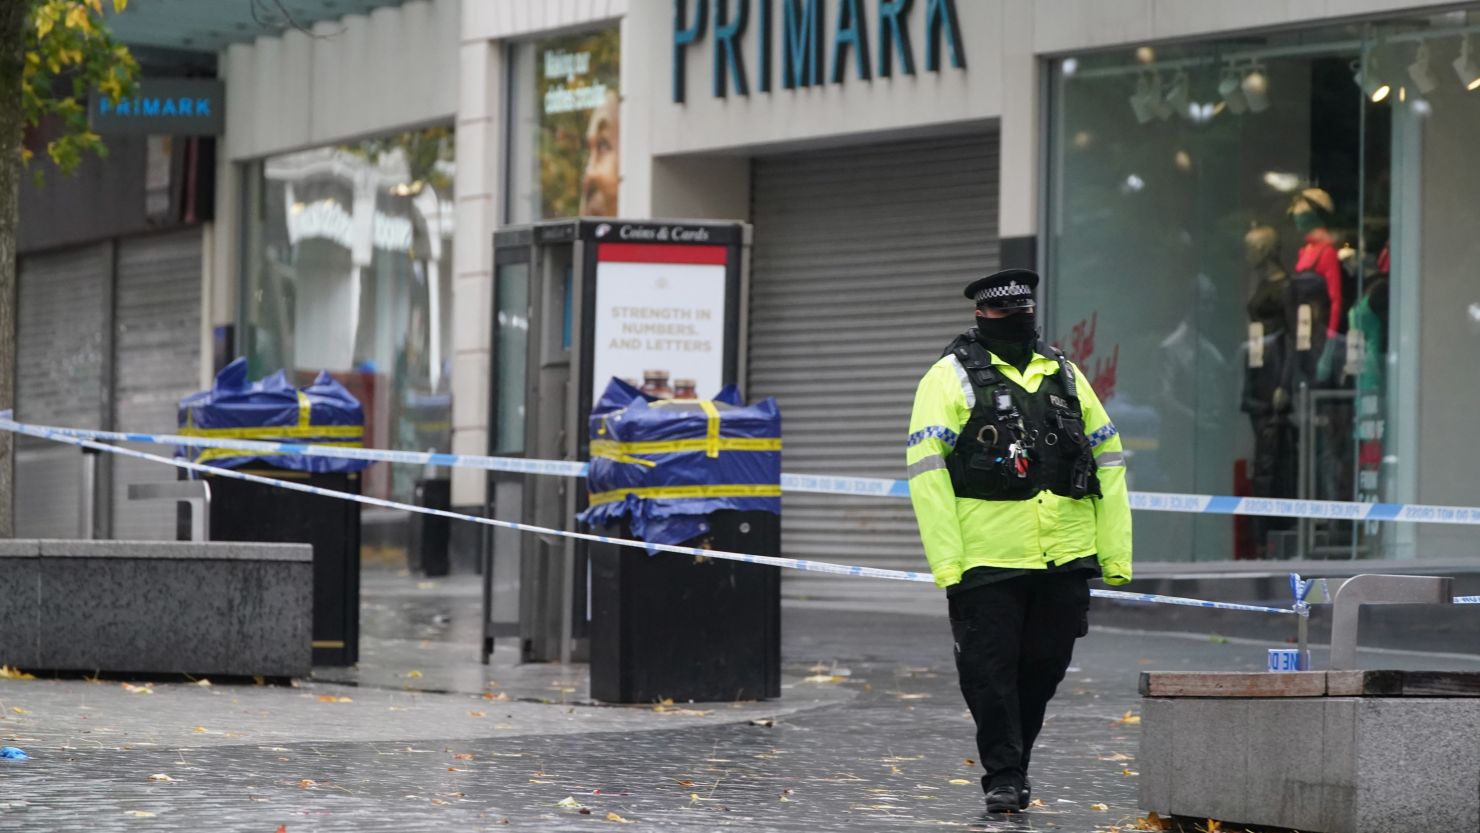 A police cordon Friday near the scene in Liverpool city center where 12-year-old Ava White died following an assault.